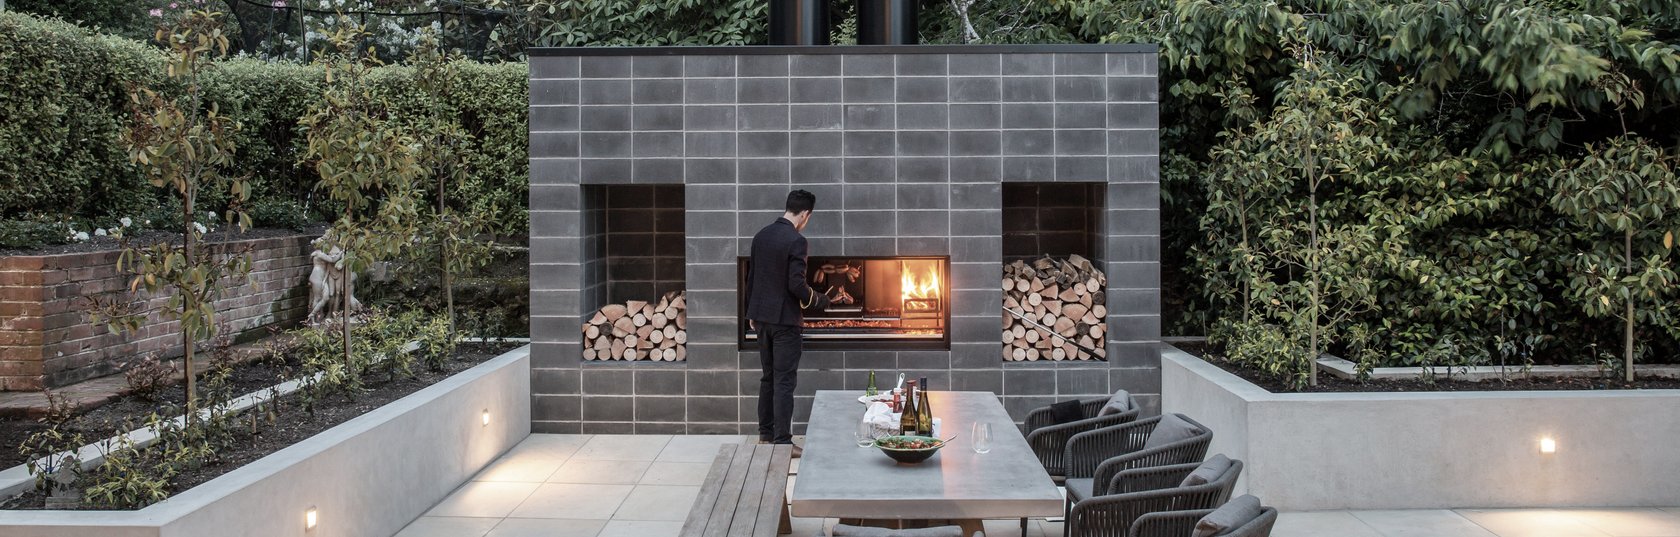 Expert Advice: Choosing And Installing An Outdoor Fireplace With Stoke